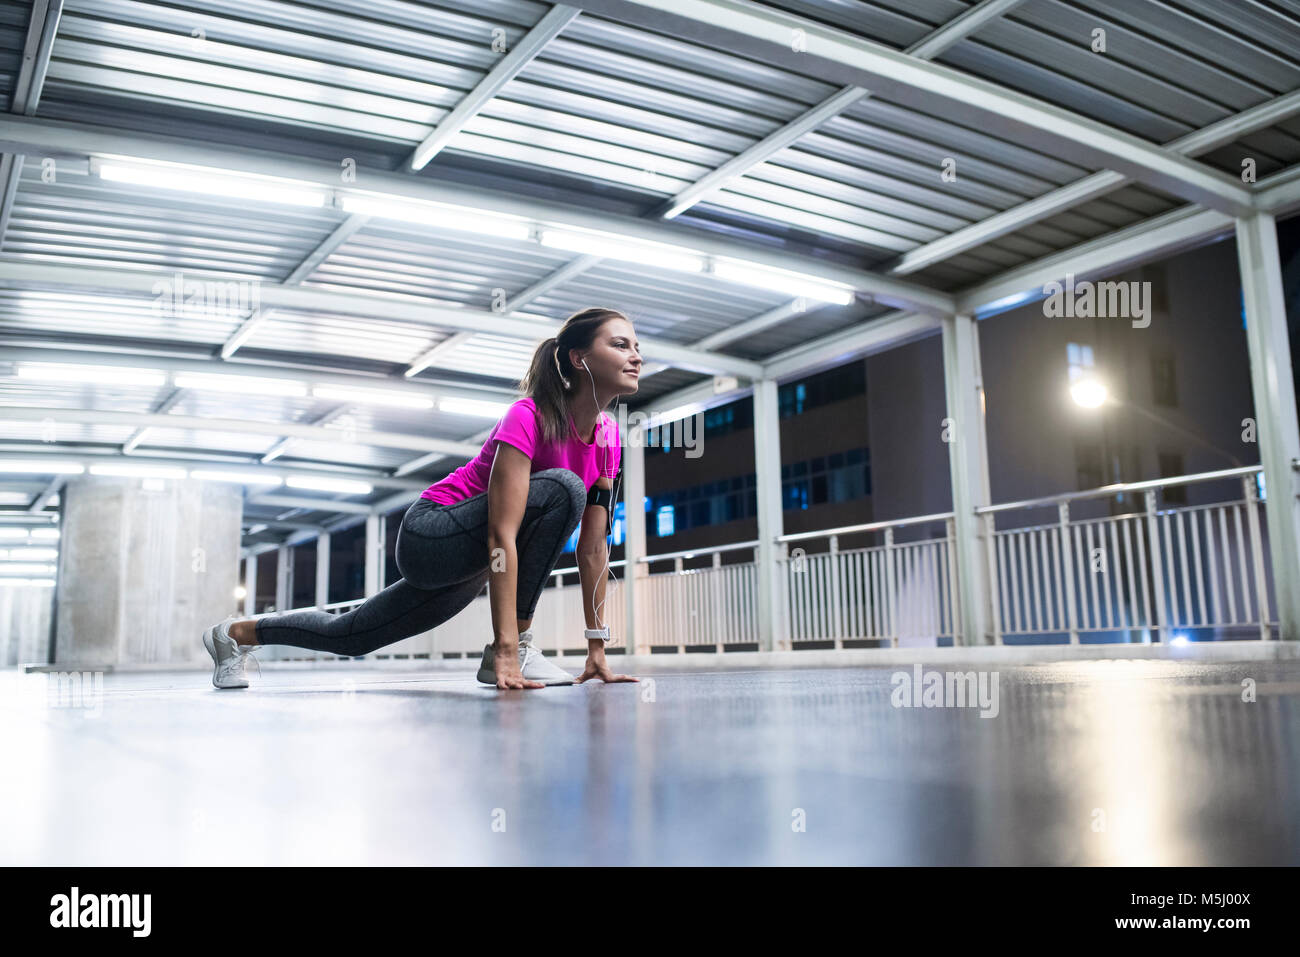 Young woman in pink sportshirt stretching in modern metro station at night Stock Photo